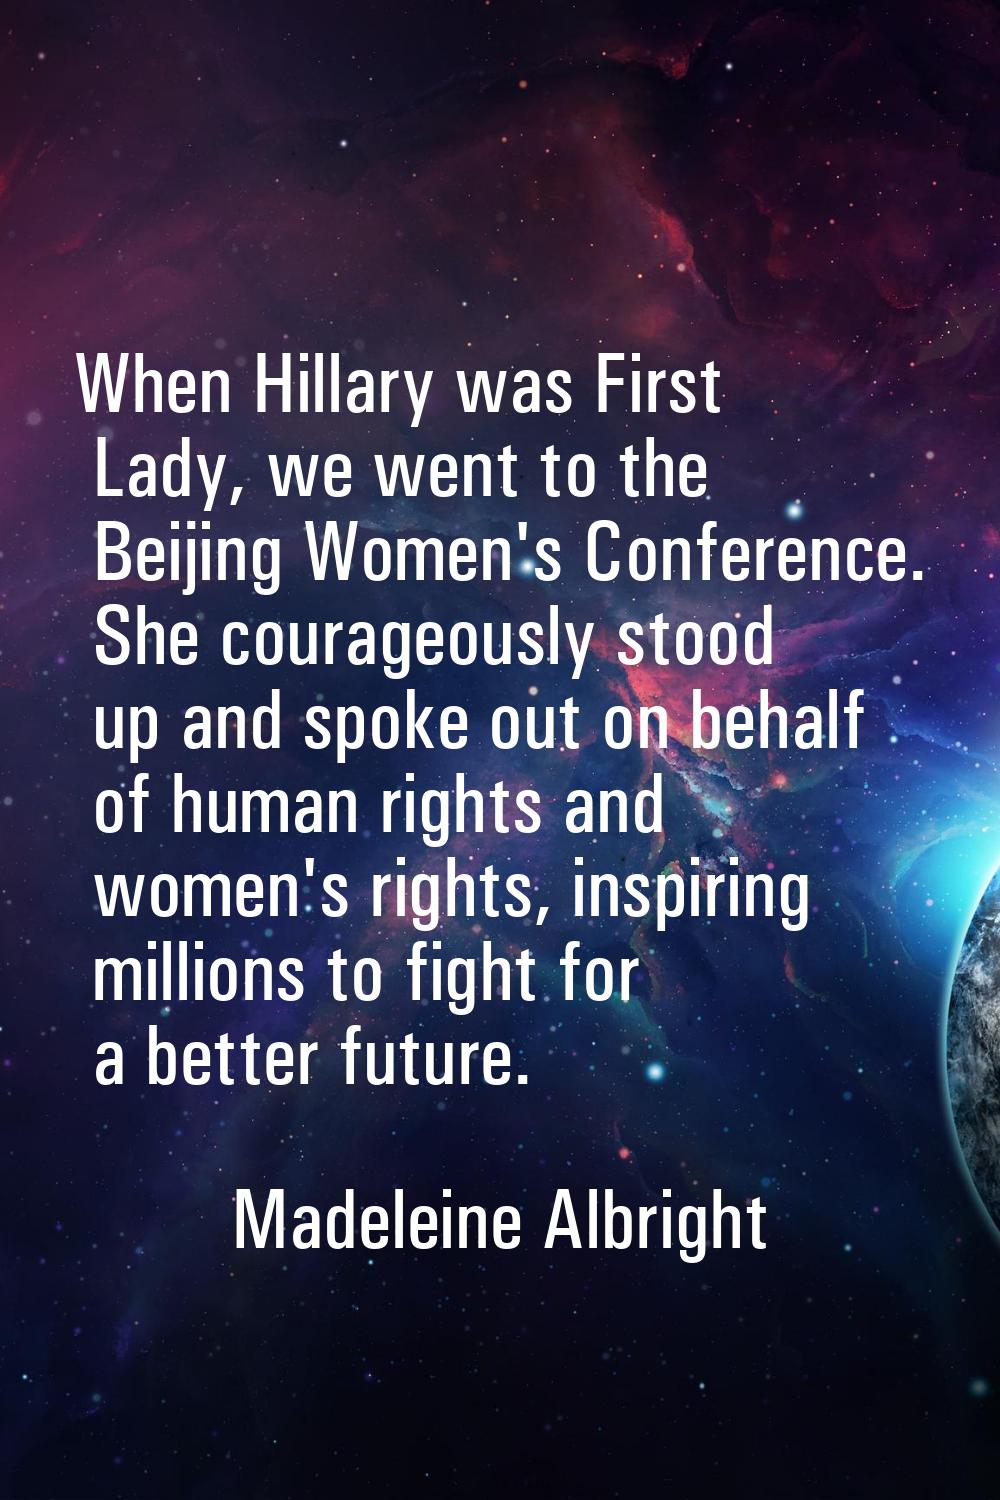 When Hillary was First Lady, we went to the Beijing Women's Conference. She courageously stood up a